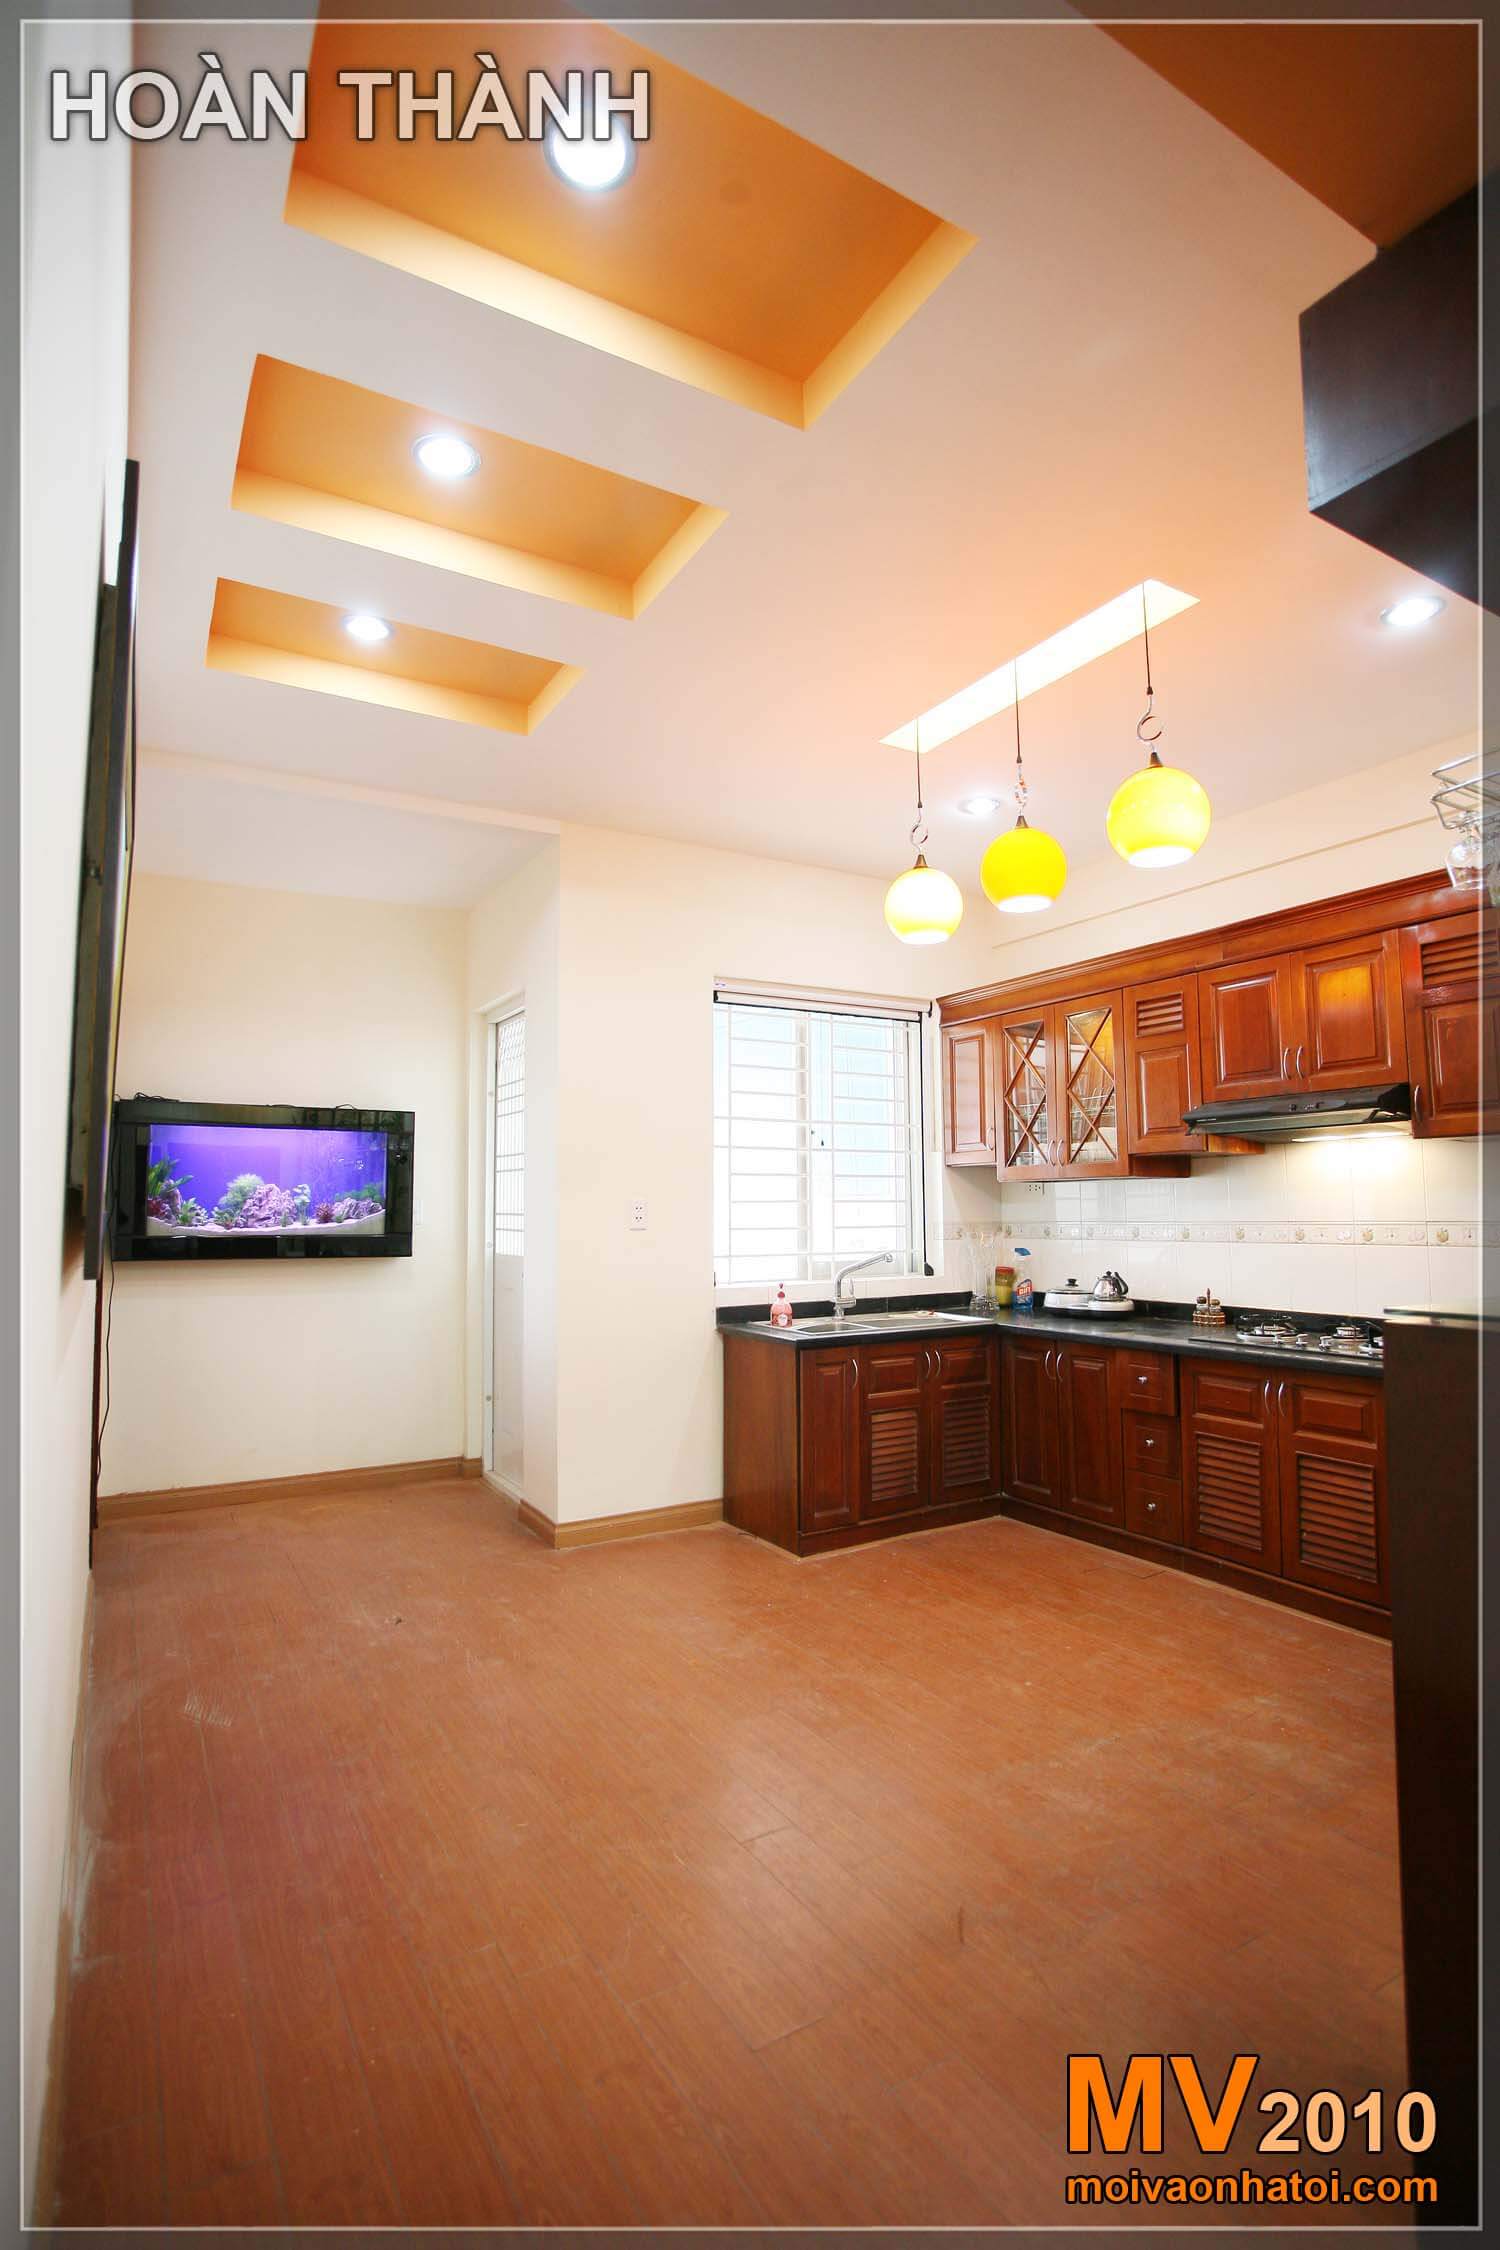 Completed construction of Viet Hung apartment kitchen